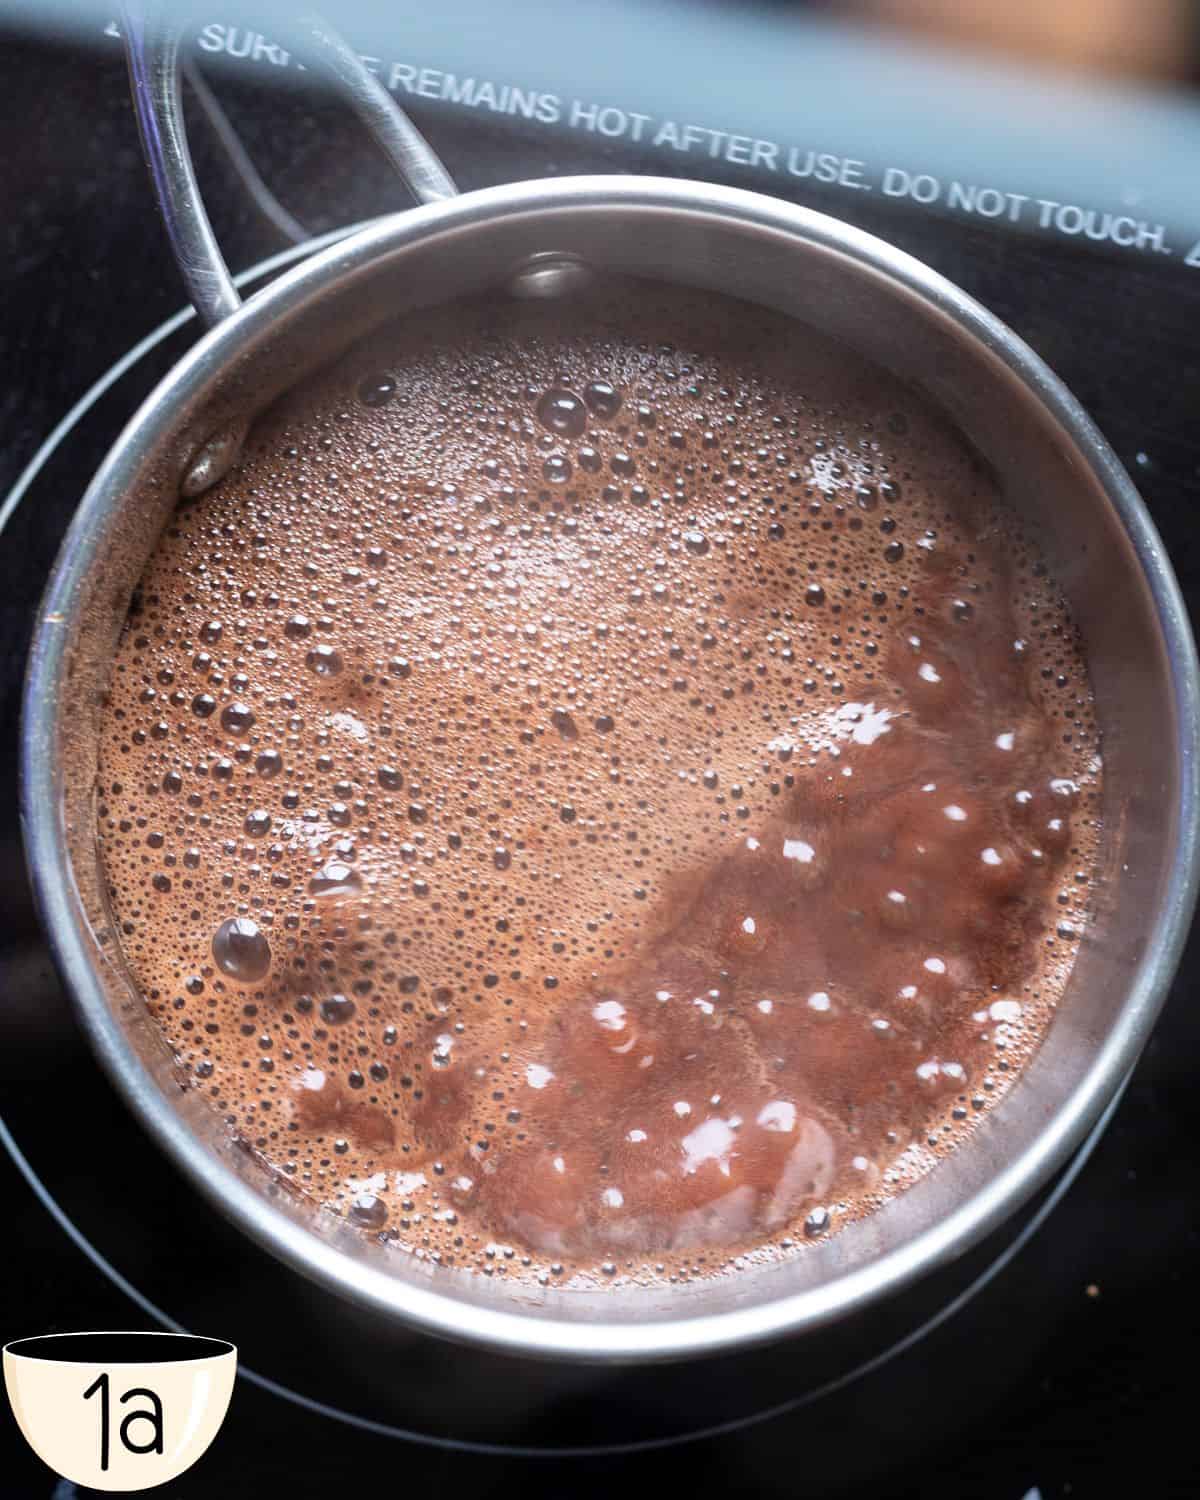 Vegan brigadeiro mixture being cooked over low heat in a pan. The mixture is just coming to a boil.